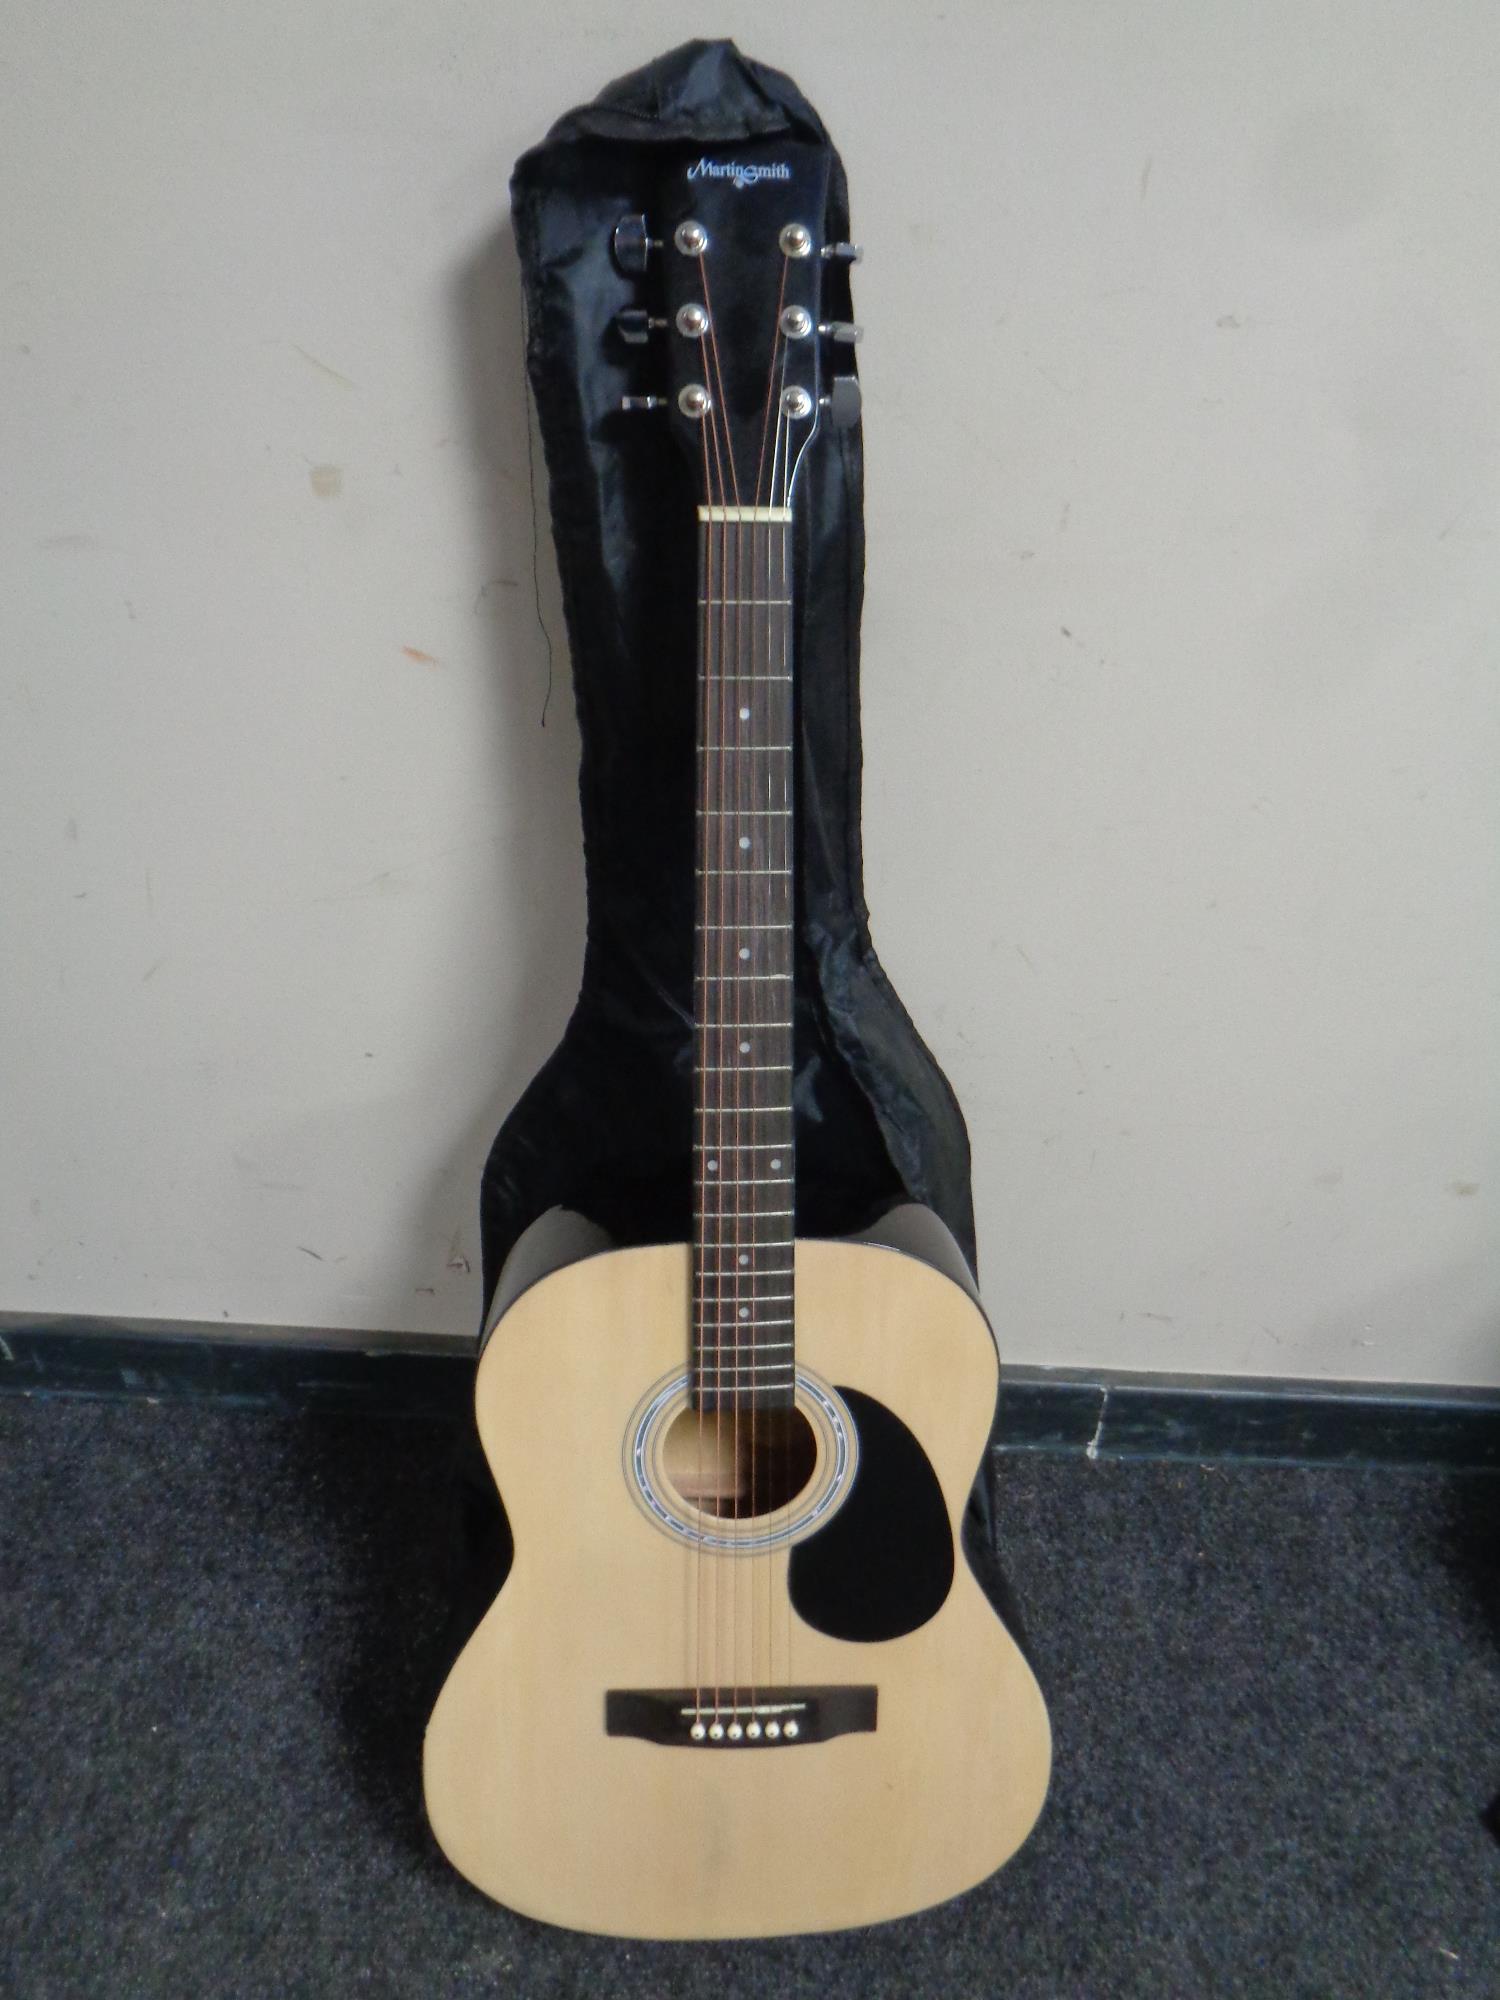 A Martin Smith W-101-N-PK (natural) acoustic guitar in carry bag.